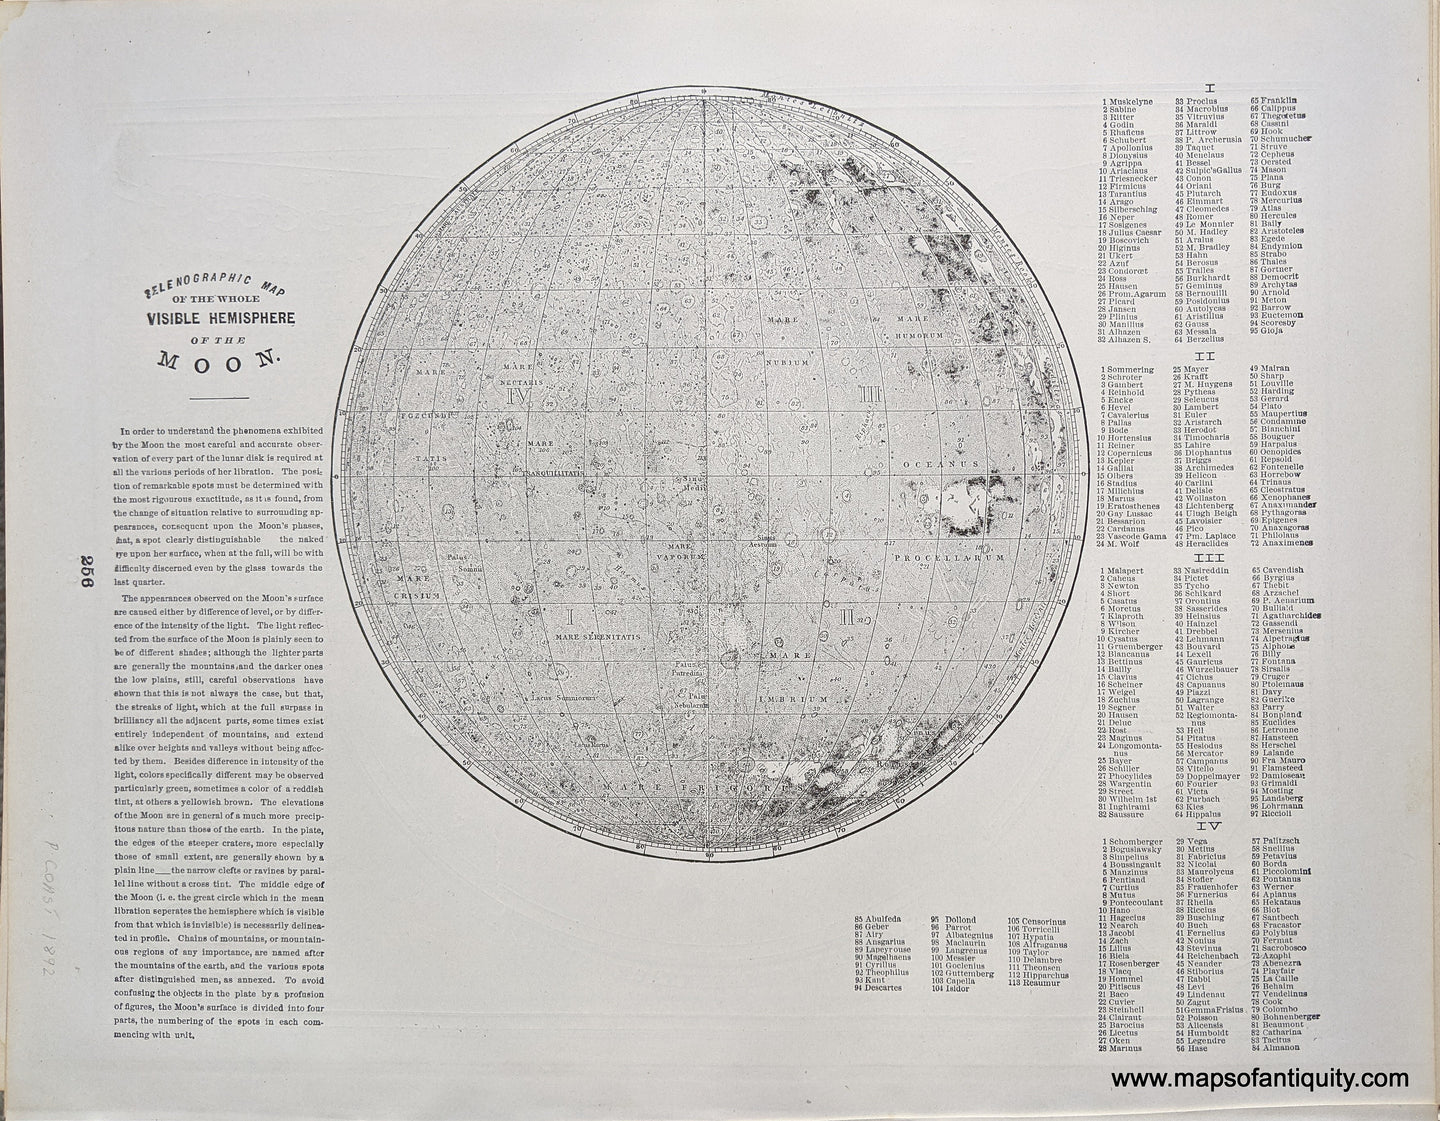 Genuine-Antique-Printed-Color-Comparative-Chart-Phases-and-Movements-of-the-Moon;-verso:-Selenographic-Map-of-the-Whole-Visible-Hemisphere-of-the-Moon-Celestial--1892-Home-Library-&-Supply-Association-Maps-Of-Antiquity-1800s-19th-century